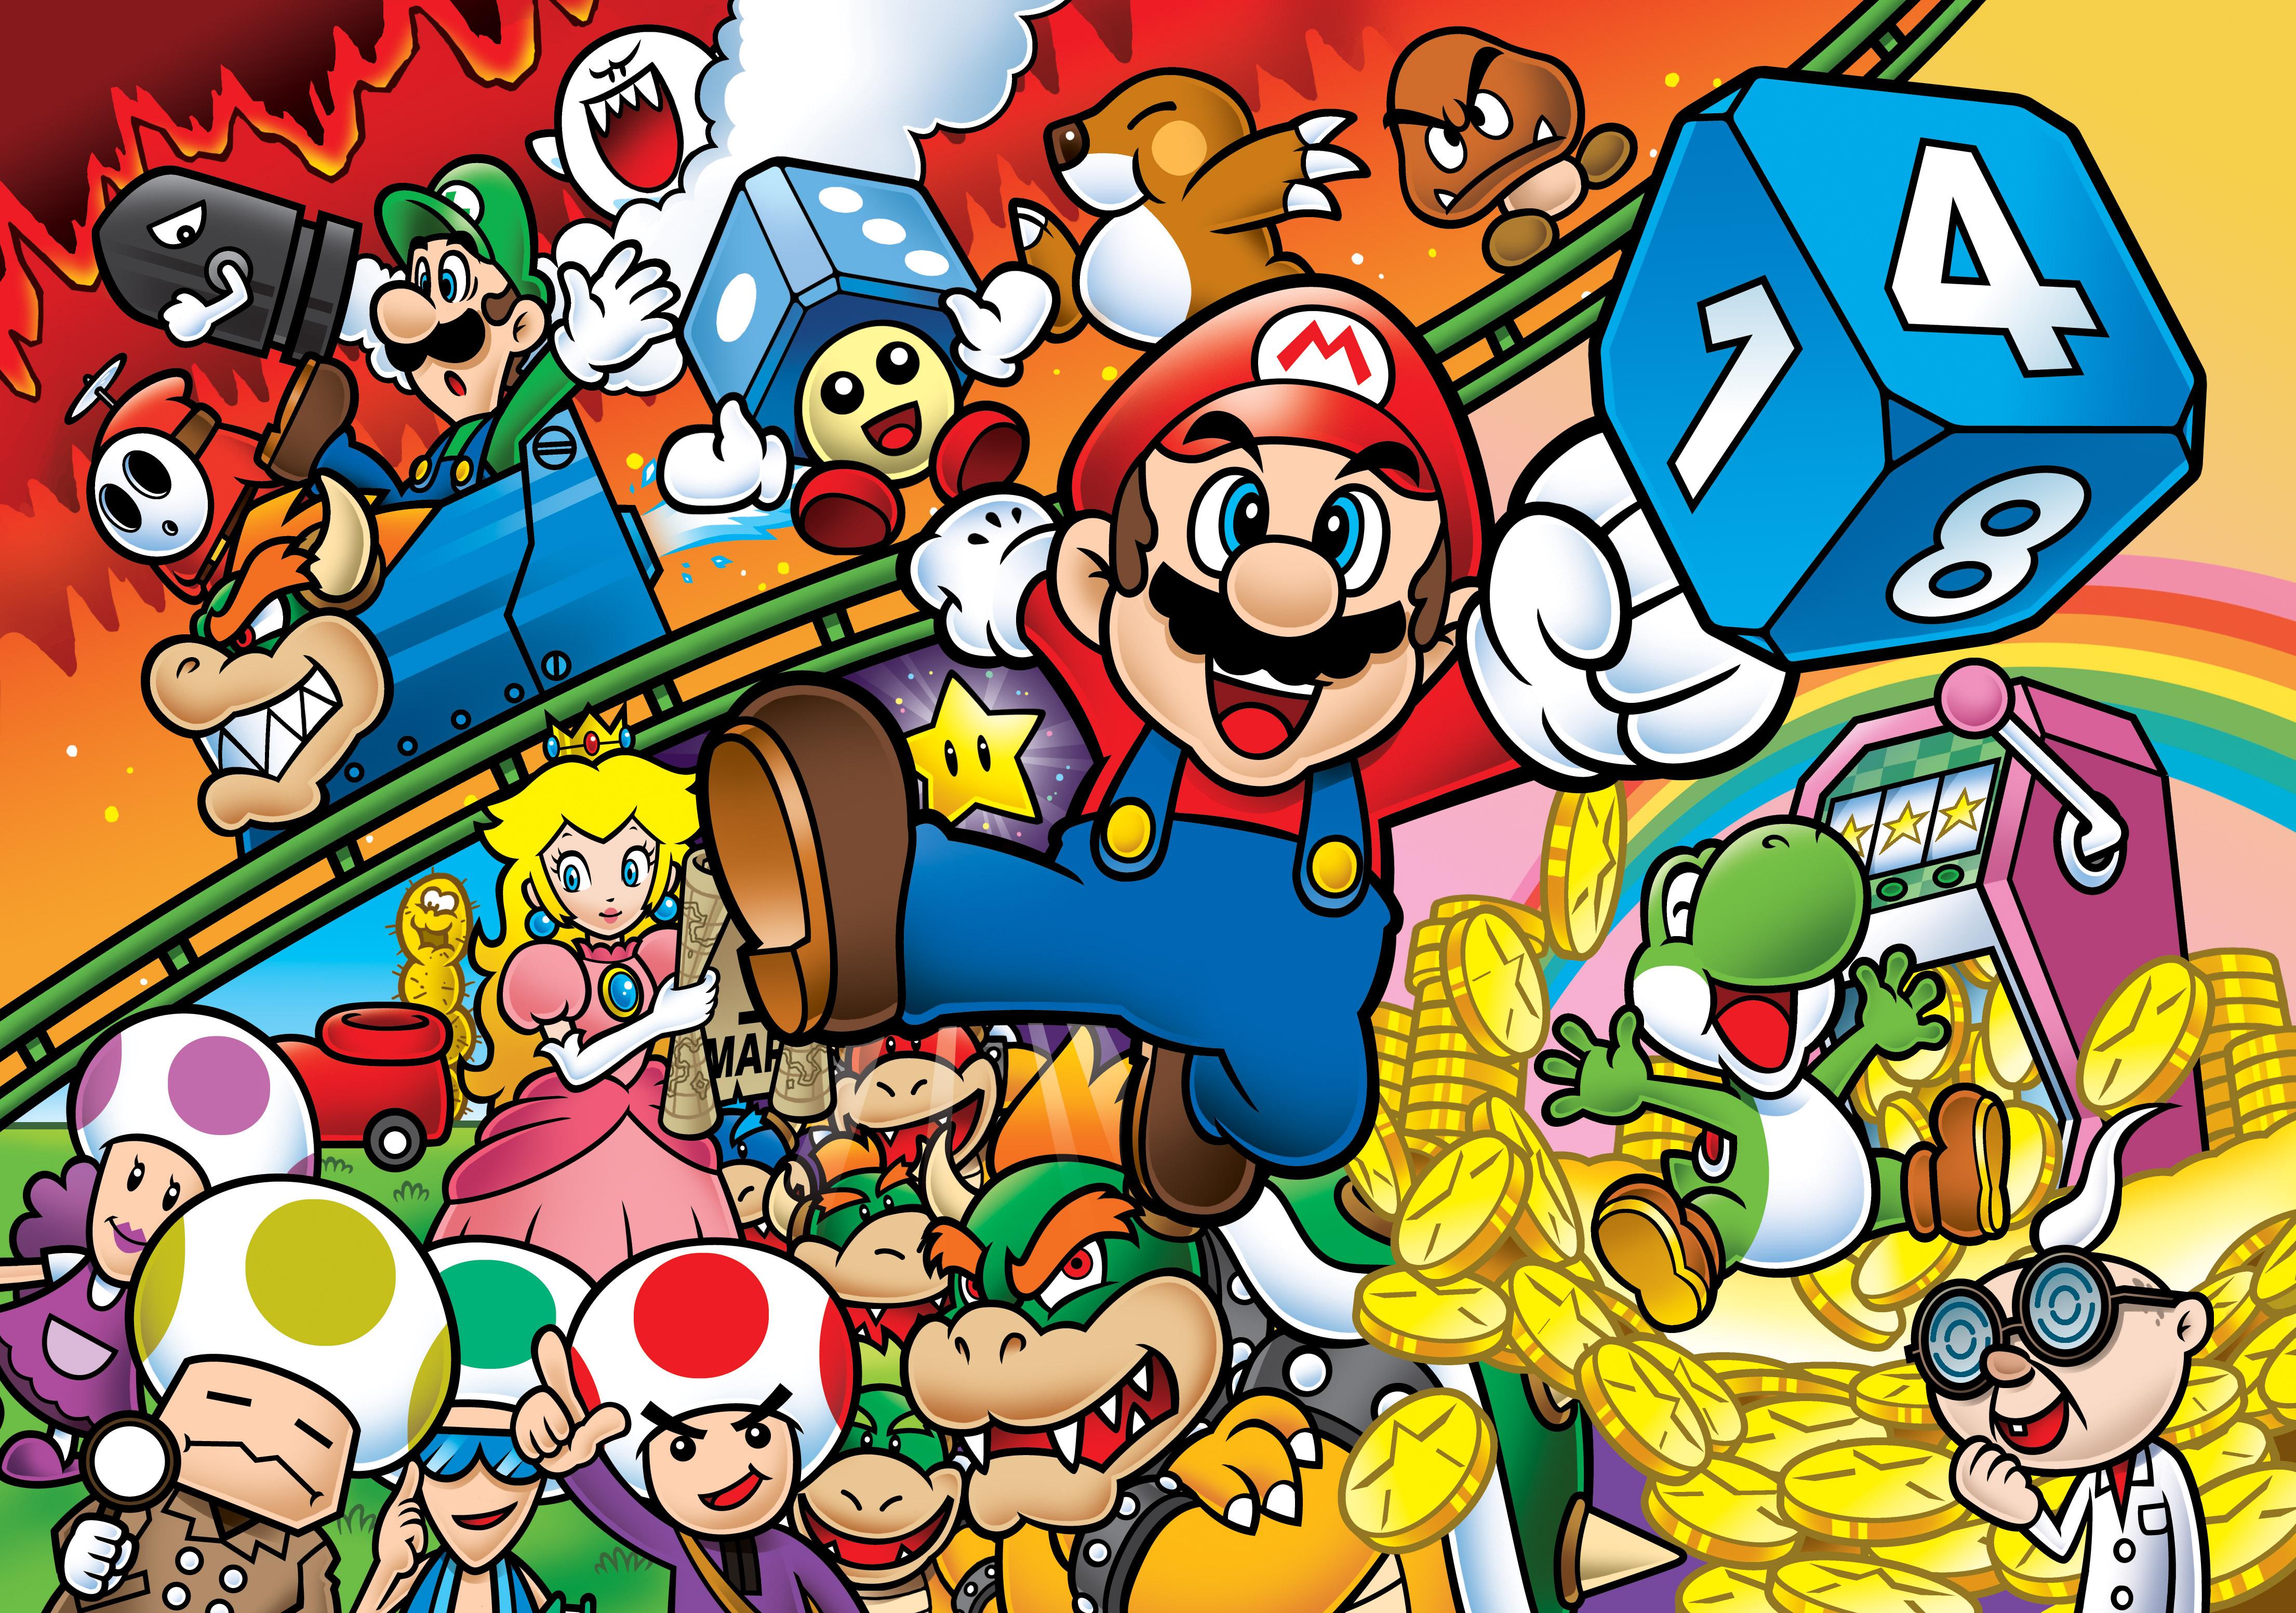 An official group artwork from Mario Party Advance